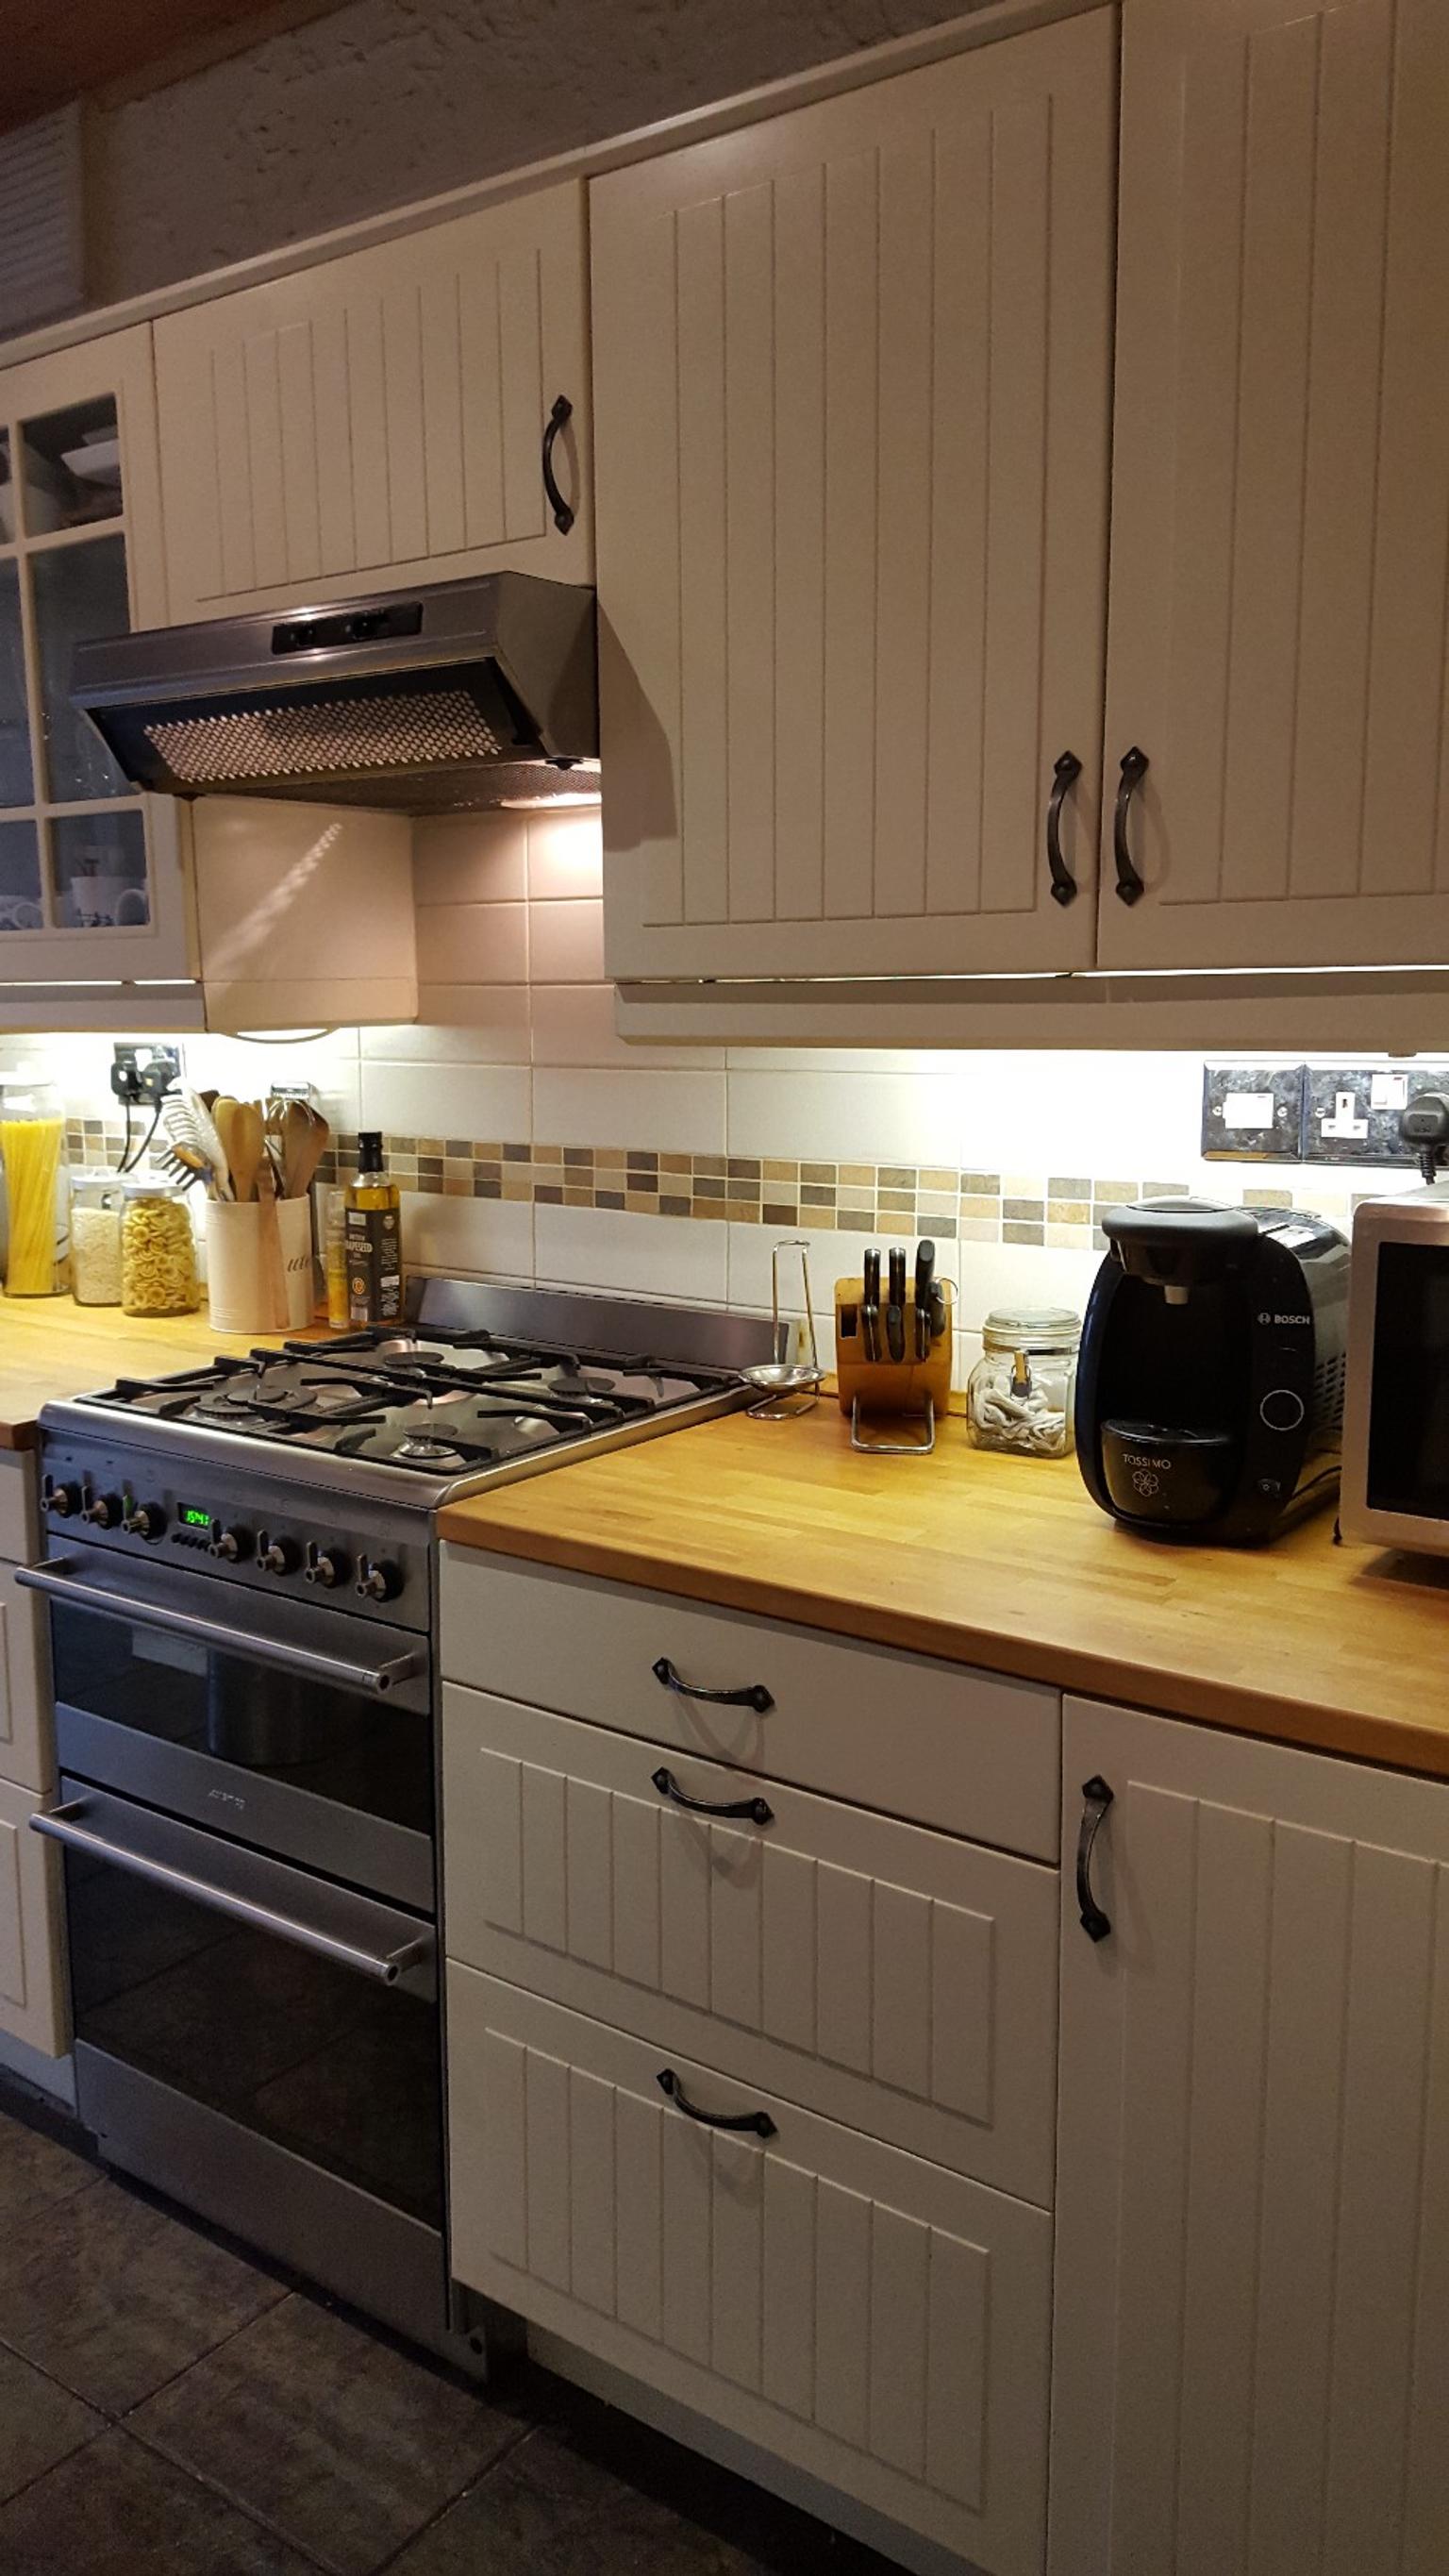 Ikea Faktum Kitchen Units In B91 Solihull For 200 00 For Sale